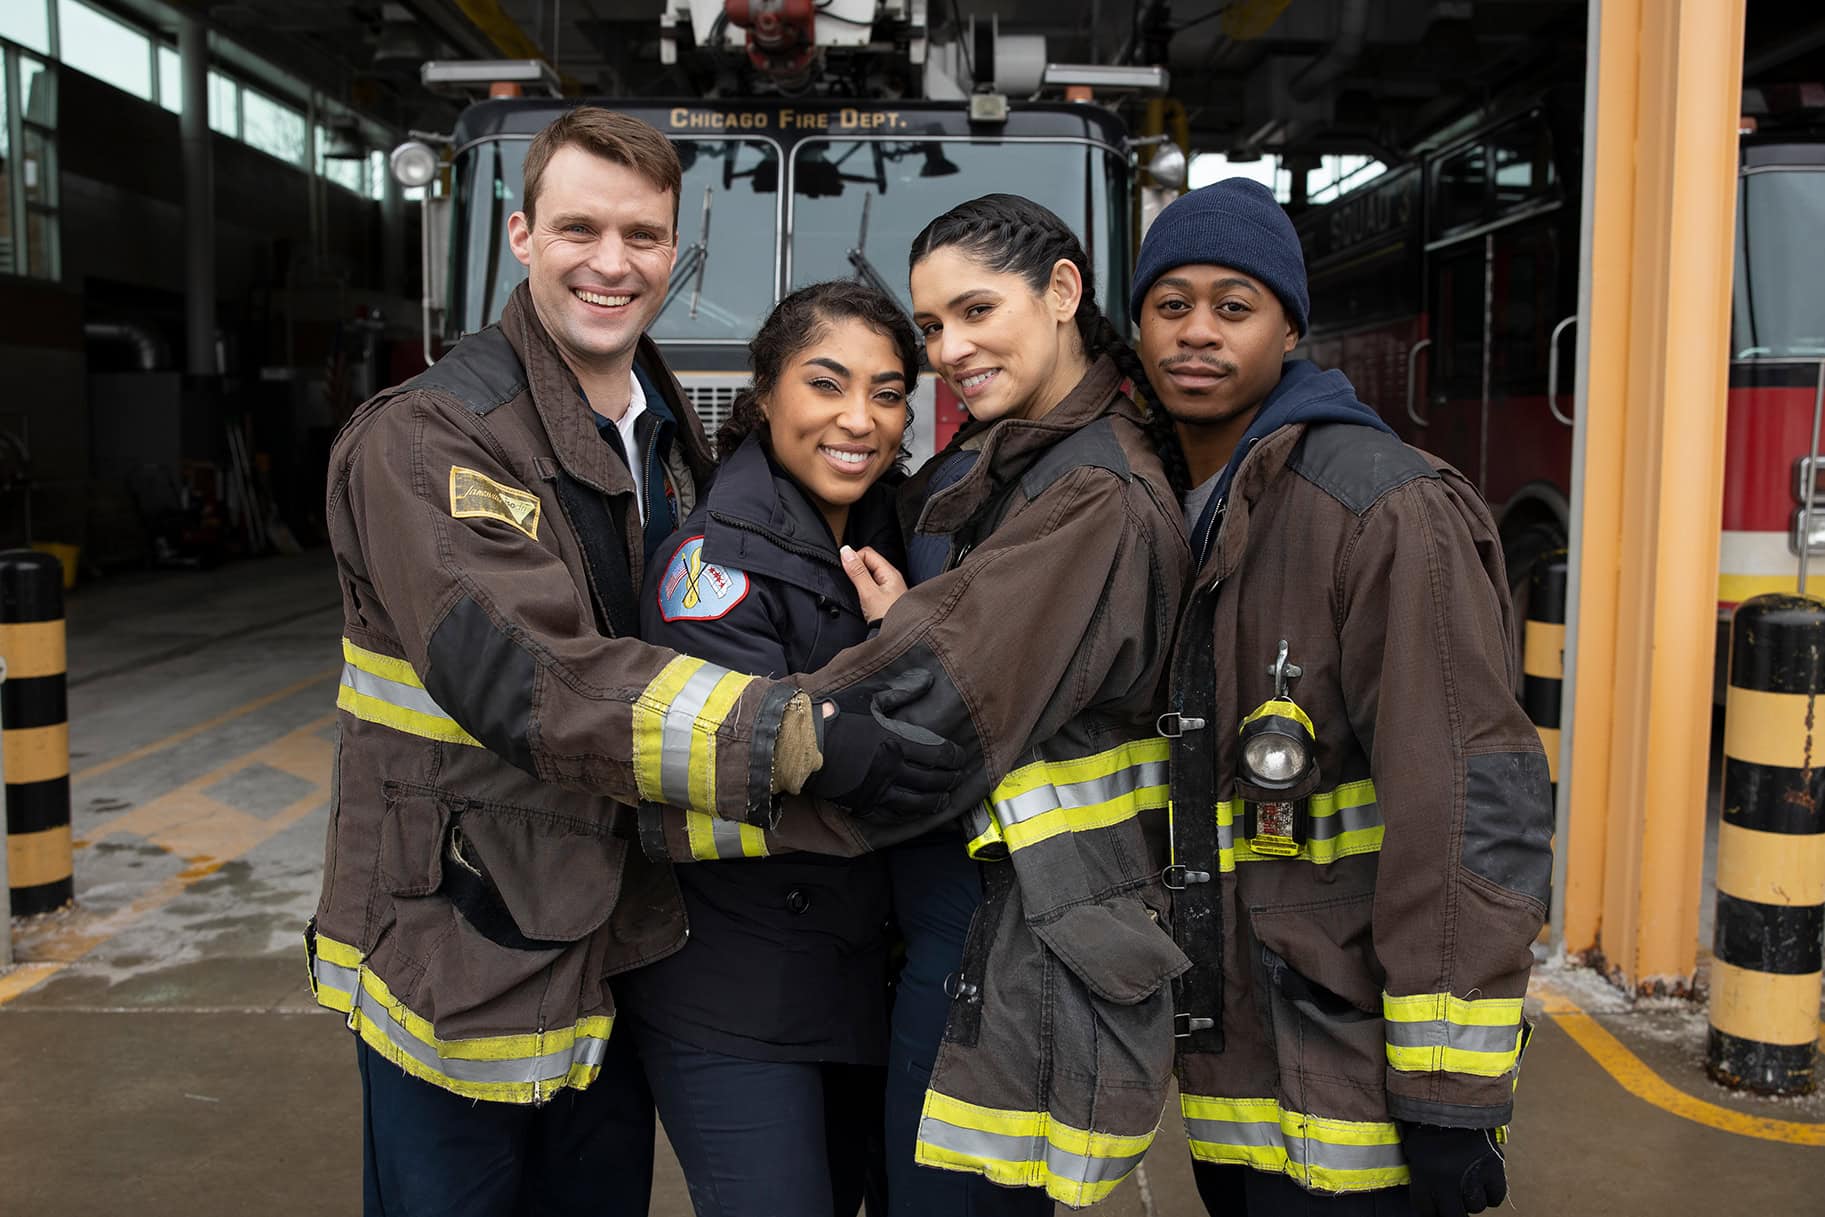 Who Is Leaving and Returning to Chicago Fire in Season 12 and 13?